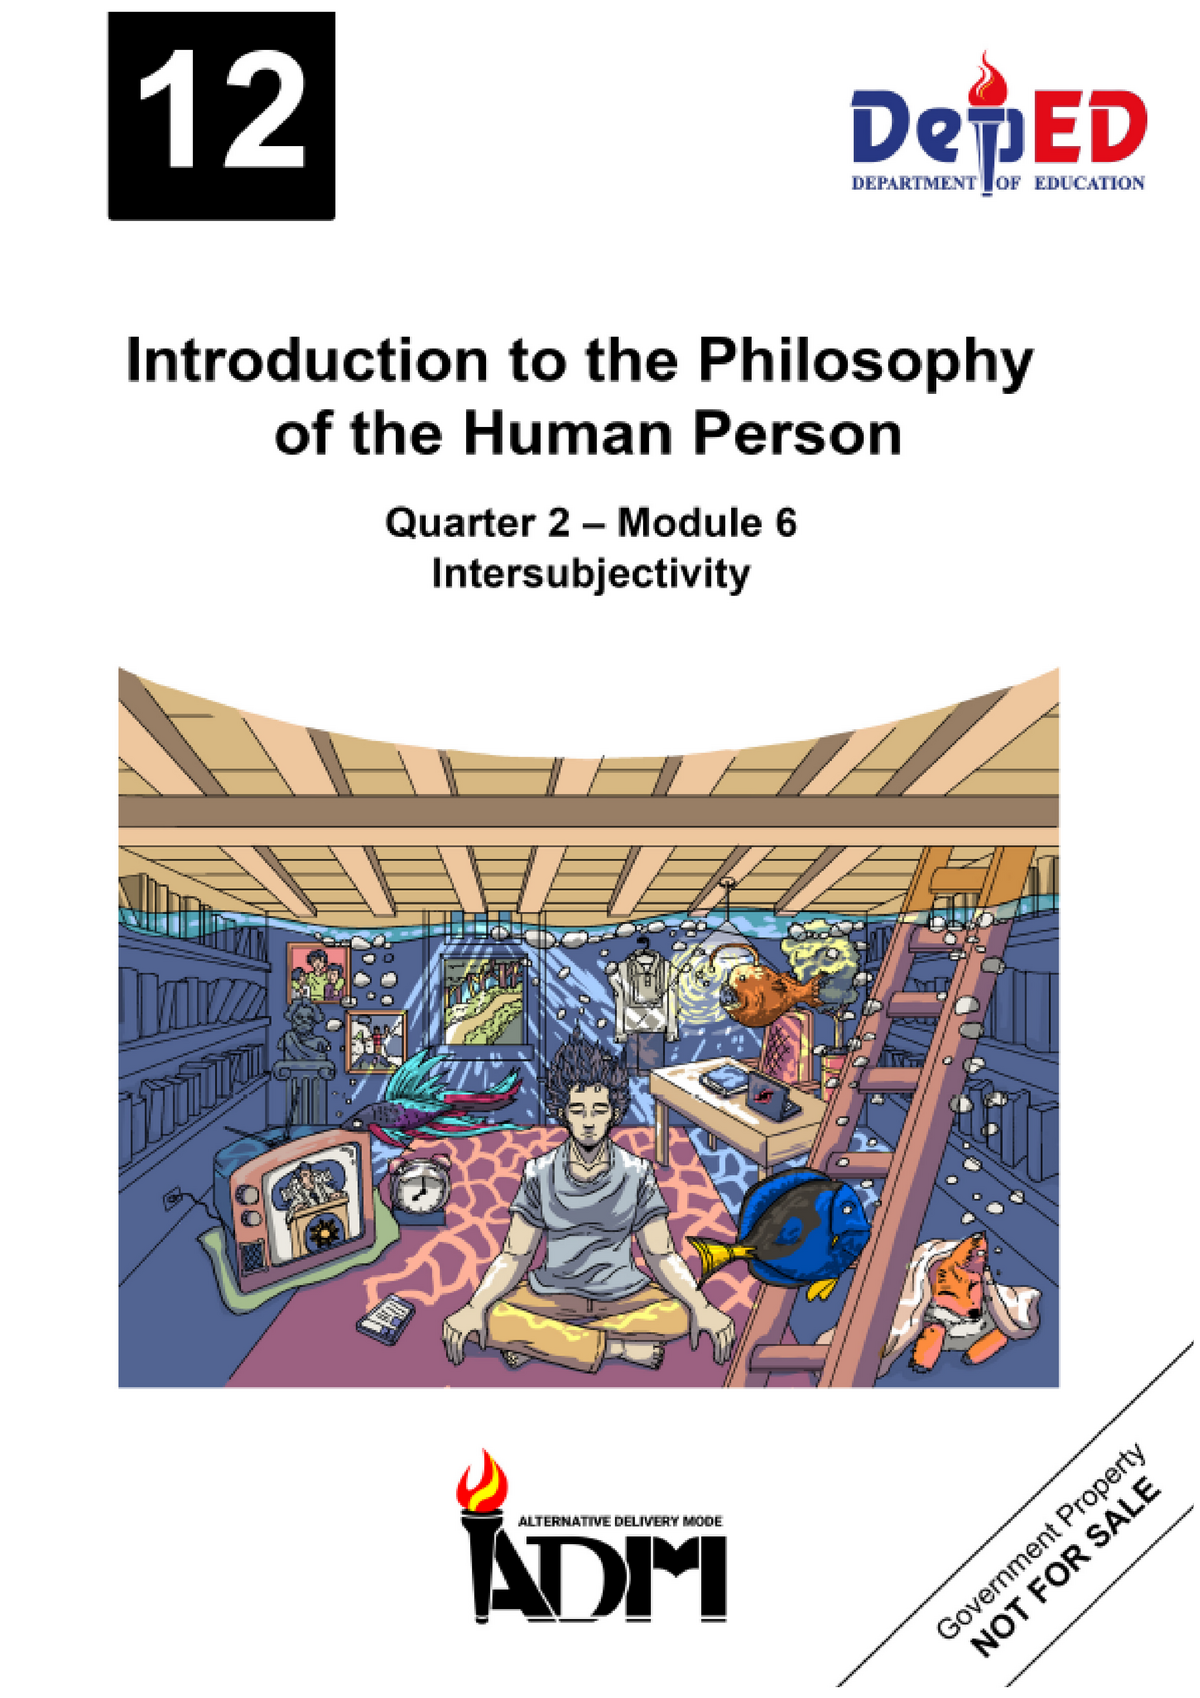 Q2w1 Introduction To The Philosophy Of The Human Person Intersubjectivity Development Team Of 4323